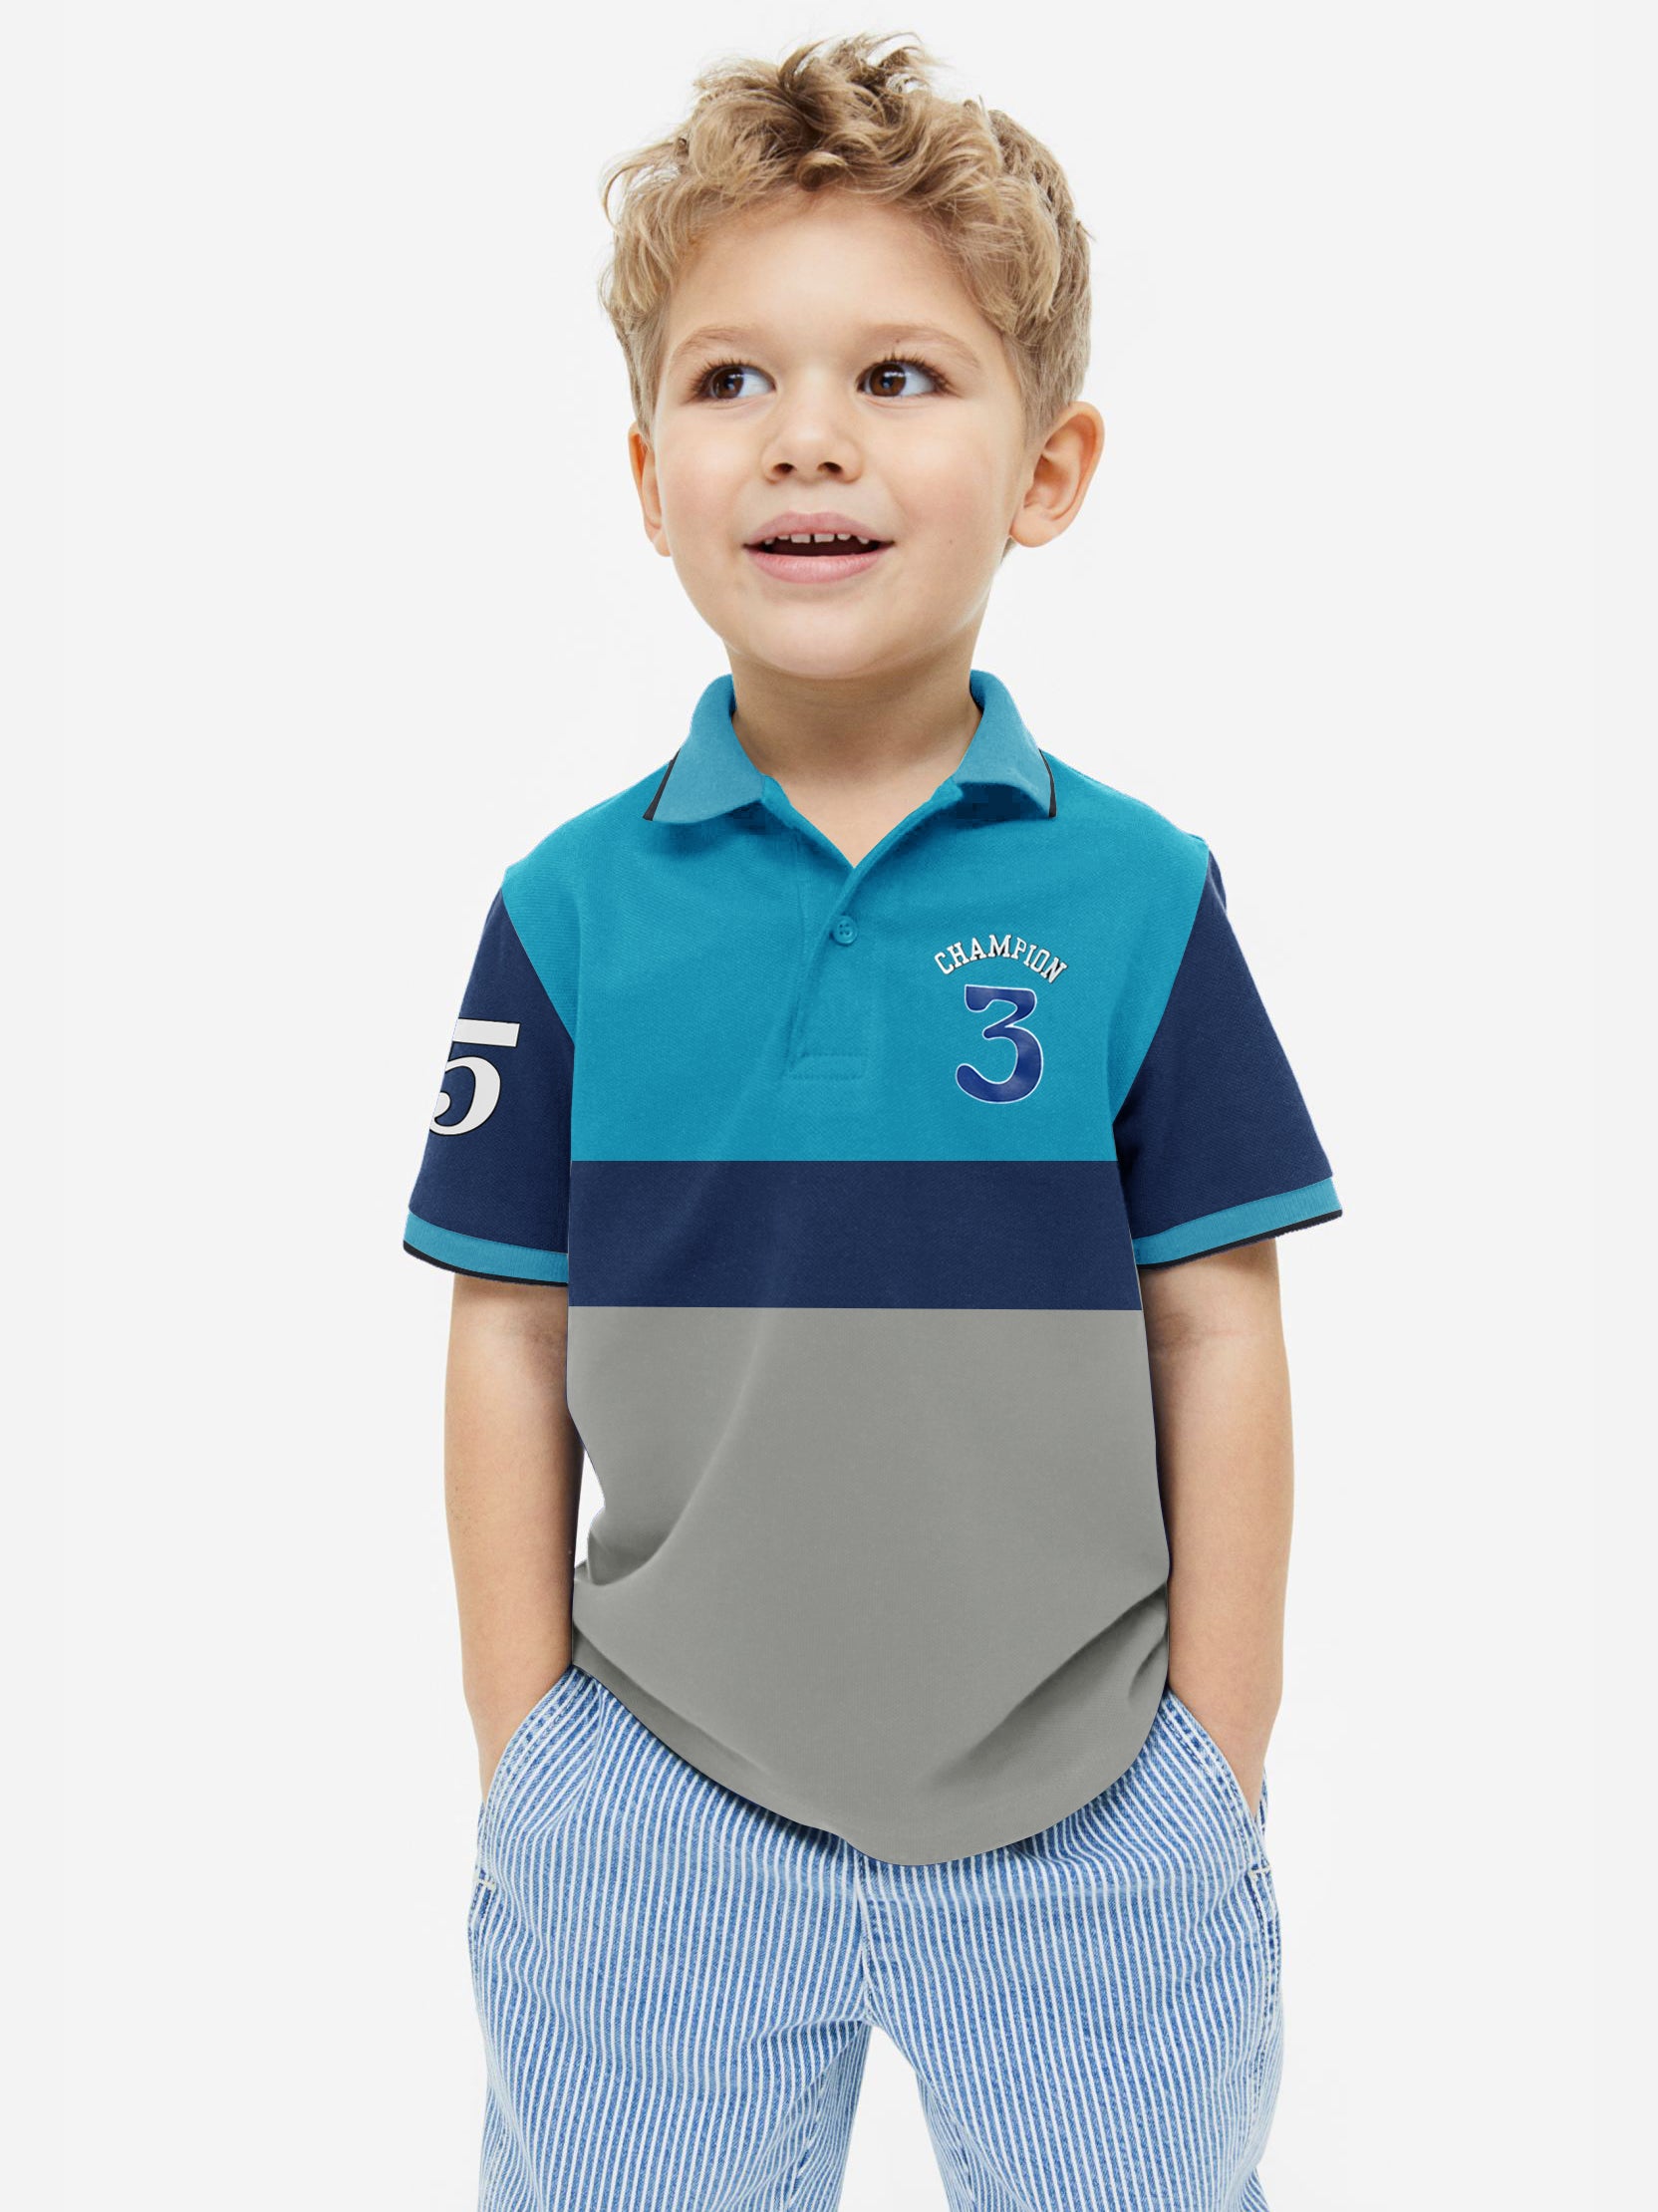 Champion Single Jersey Polo Shirt For Kids-Grey with Dark Blue & Sky Blue-SP1701/RT2411